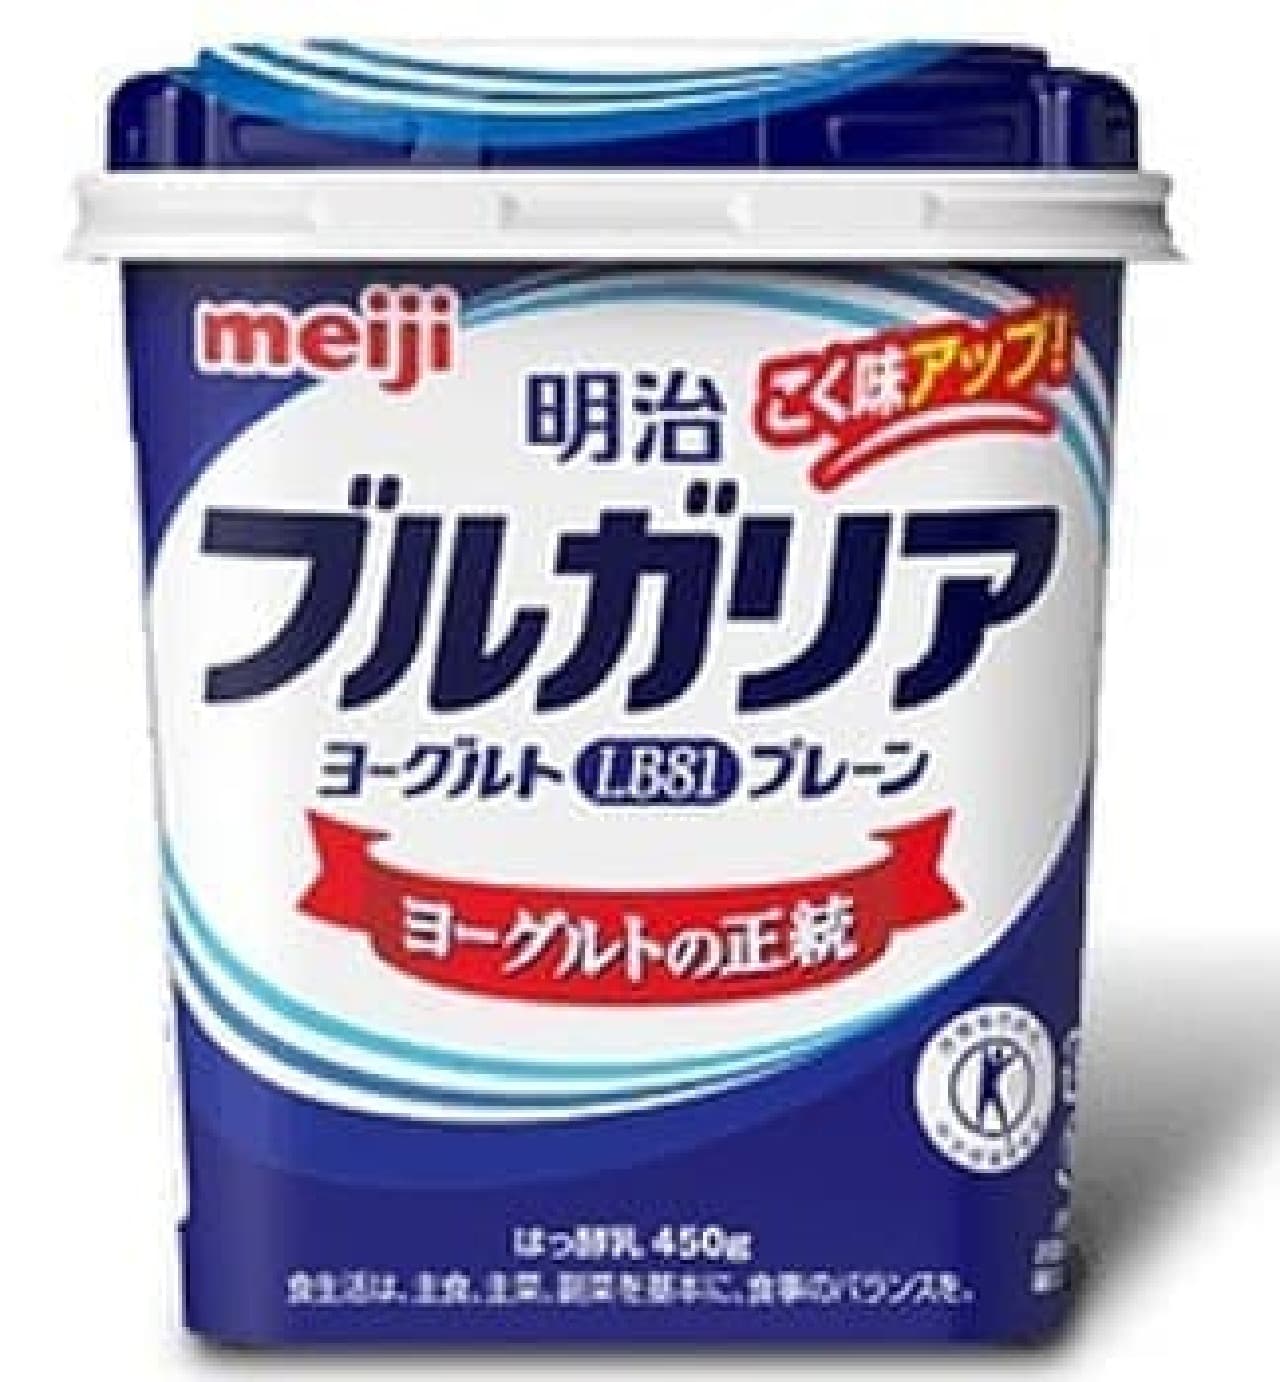 Yogurt that is delicious even if you use it as a side dish! (Source: Meiji website)